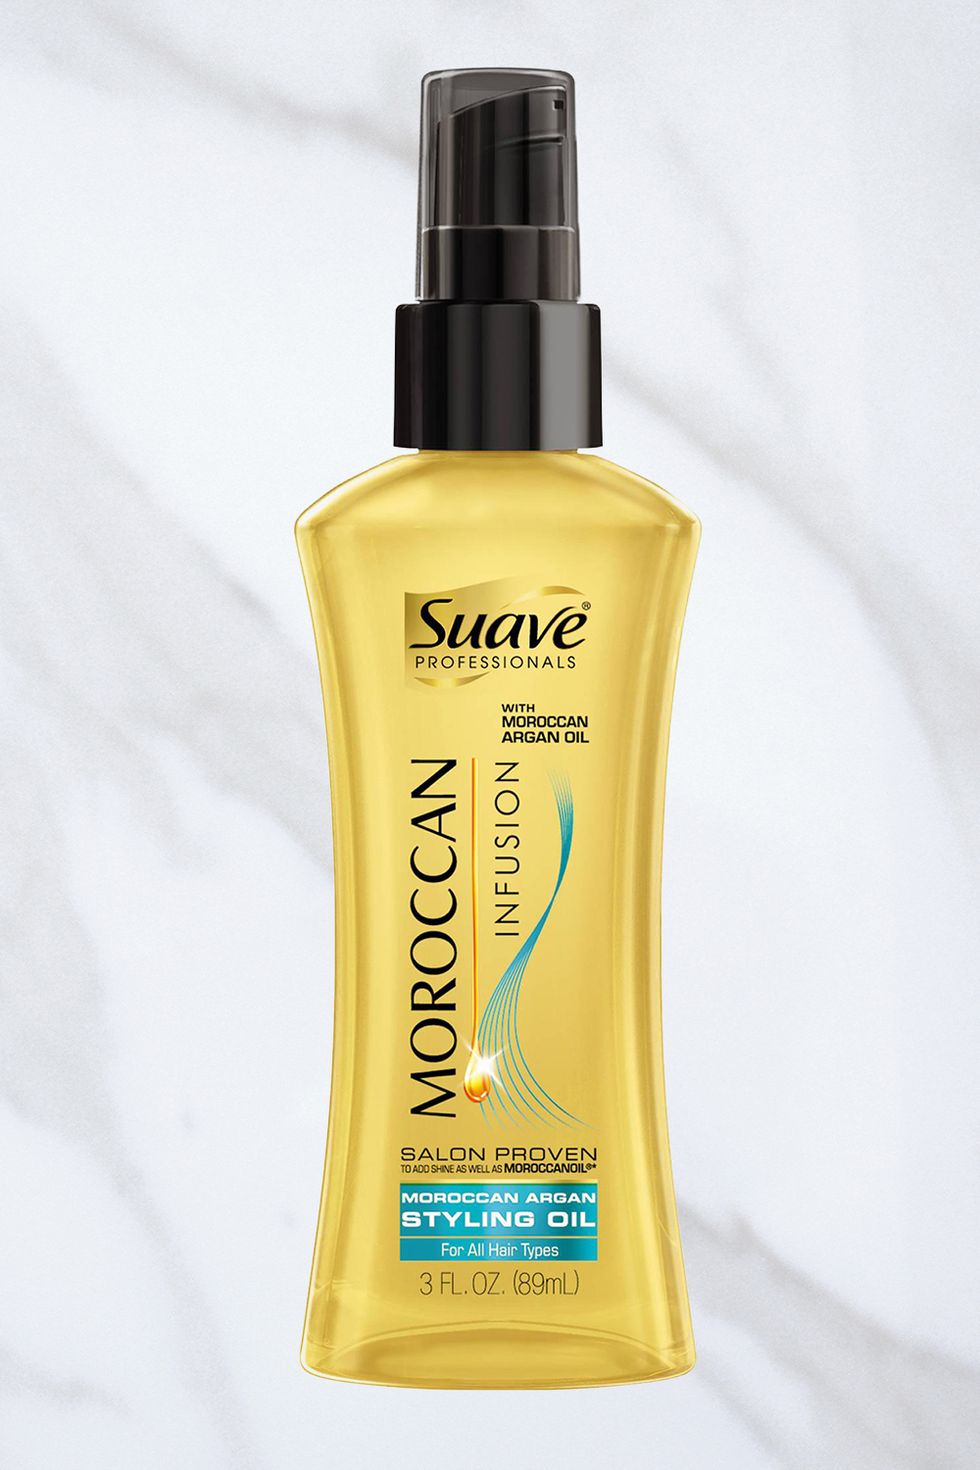 <p>"Adding shine to your hair makes it look healthy and beautiful," says Suave celebrity hairstylist Jenny Cho. For instant gloss, work a dime-size amount of <a href="http://www.walmart.com/ip/Suave-Professionals-Moroccan-Infusion-Styling-Oil-3-fl-oz/22359284" target="_blank">Suave Moroccan Infusion Styling Oil</a>, $6, from halfway down your hair to your ends. "You'll get long-lasting, silky shine," Cho says.  </p>